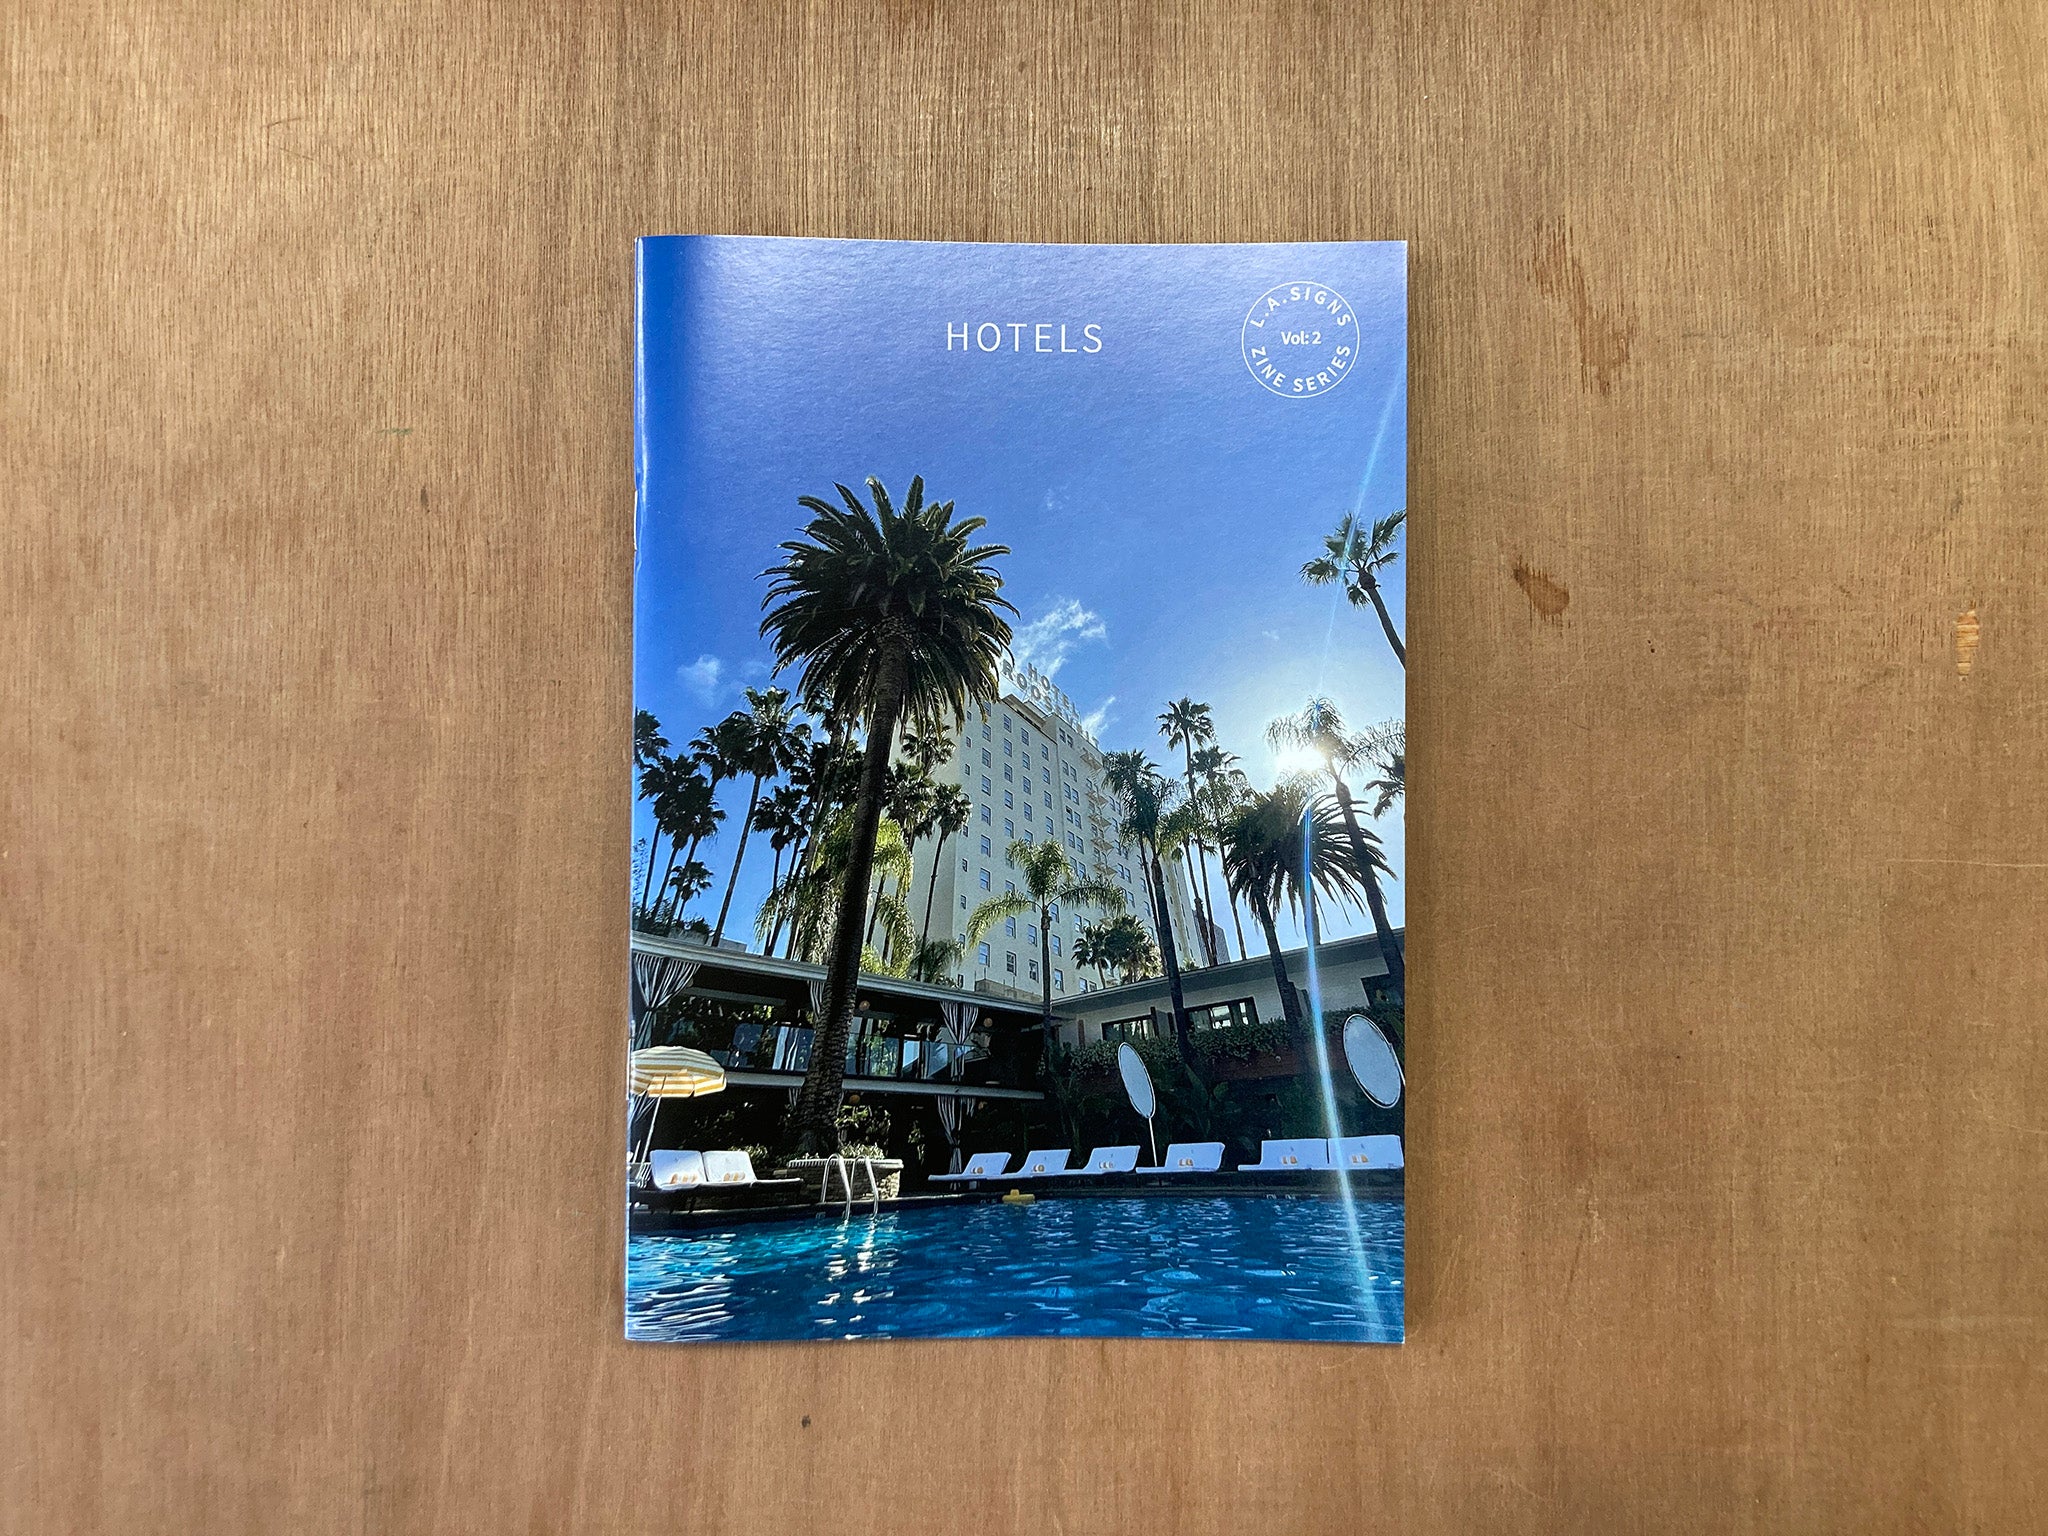 L.A. SIGNS ZINE SERIES: HOTELS by Paul Price